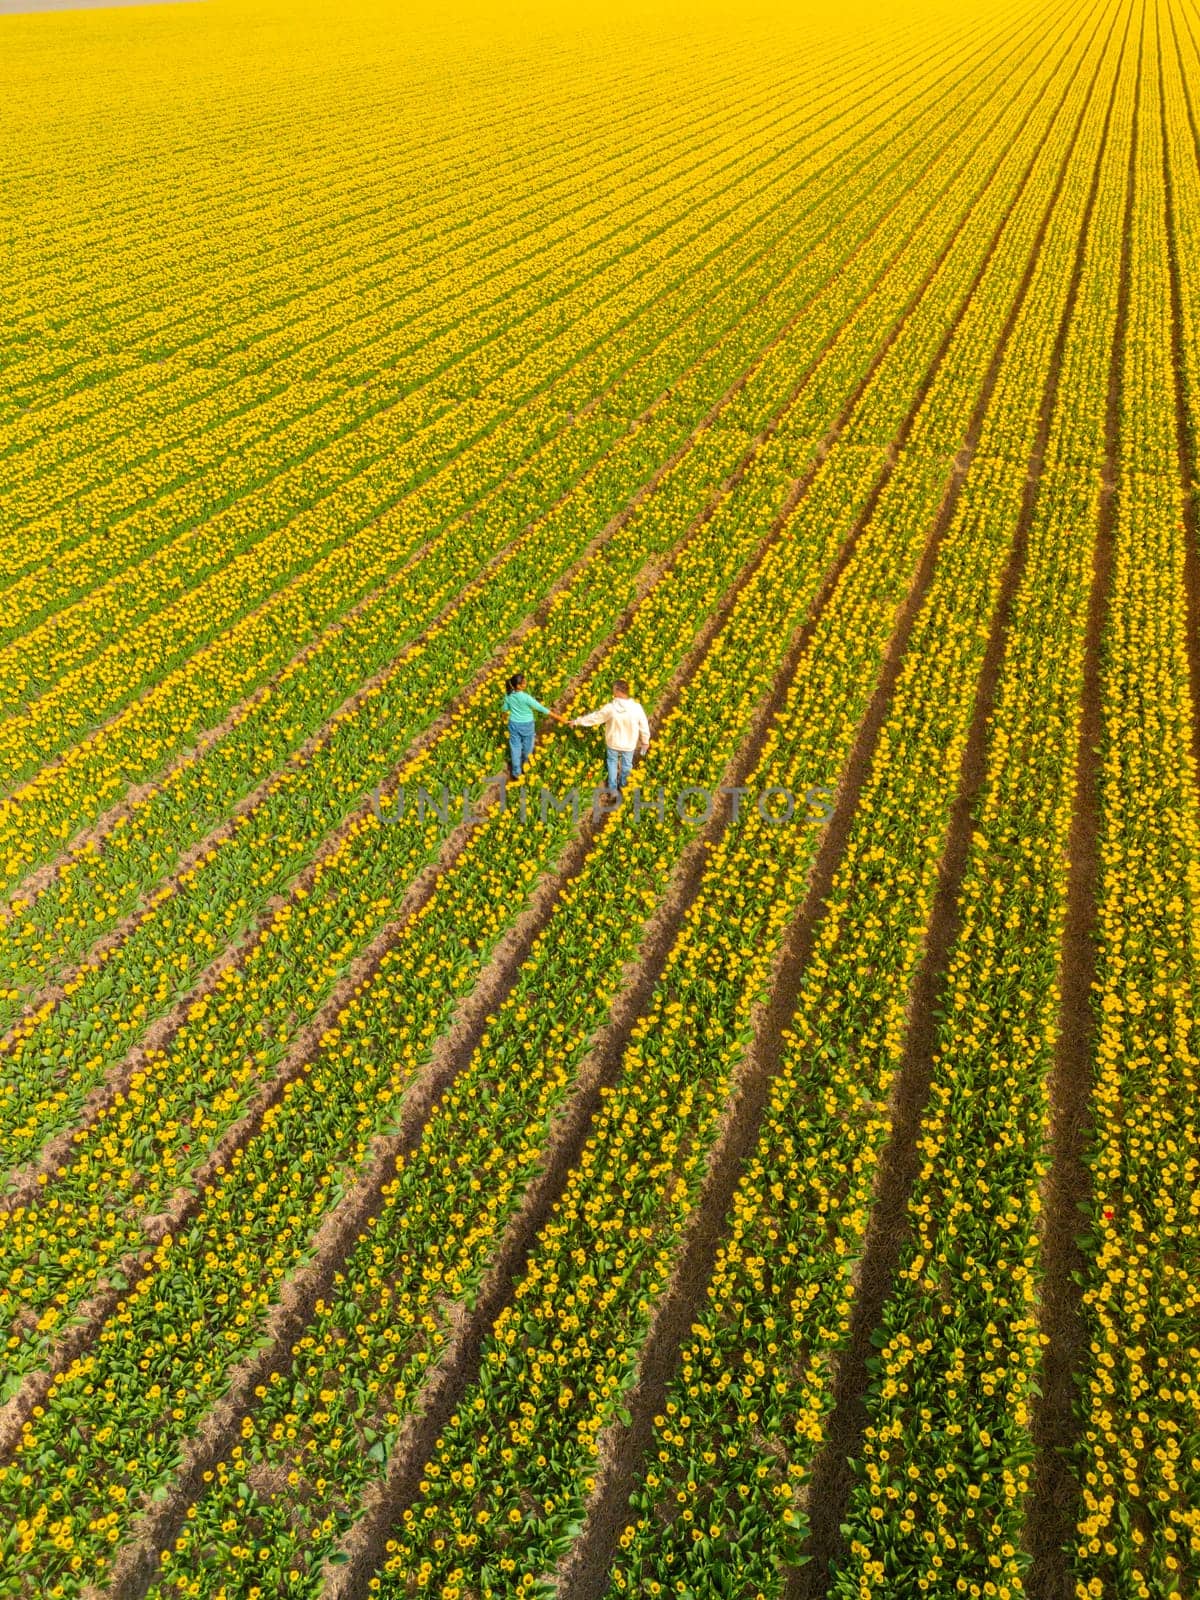 Men and women in flower fields seen from above with a drone in the Netherlands, Tulip fields in the Netherlands during Spring, a diverse couple of an Asian woman and a Caucasian man